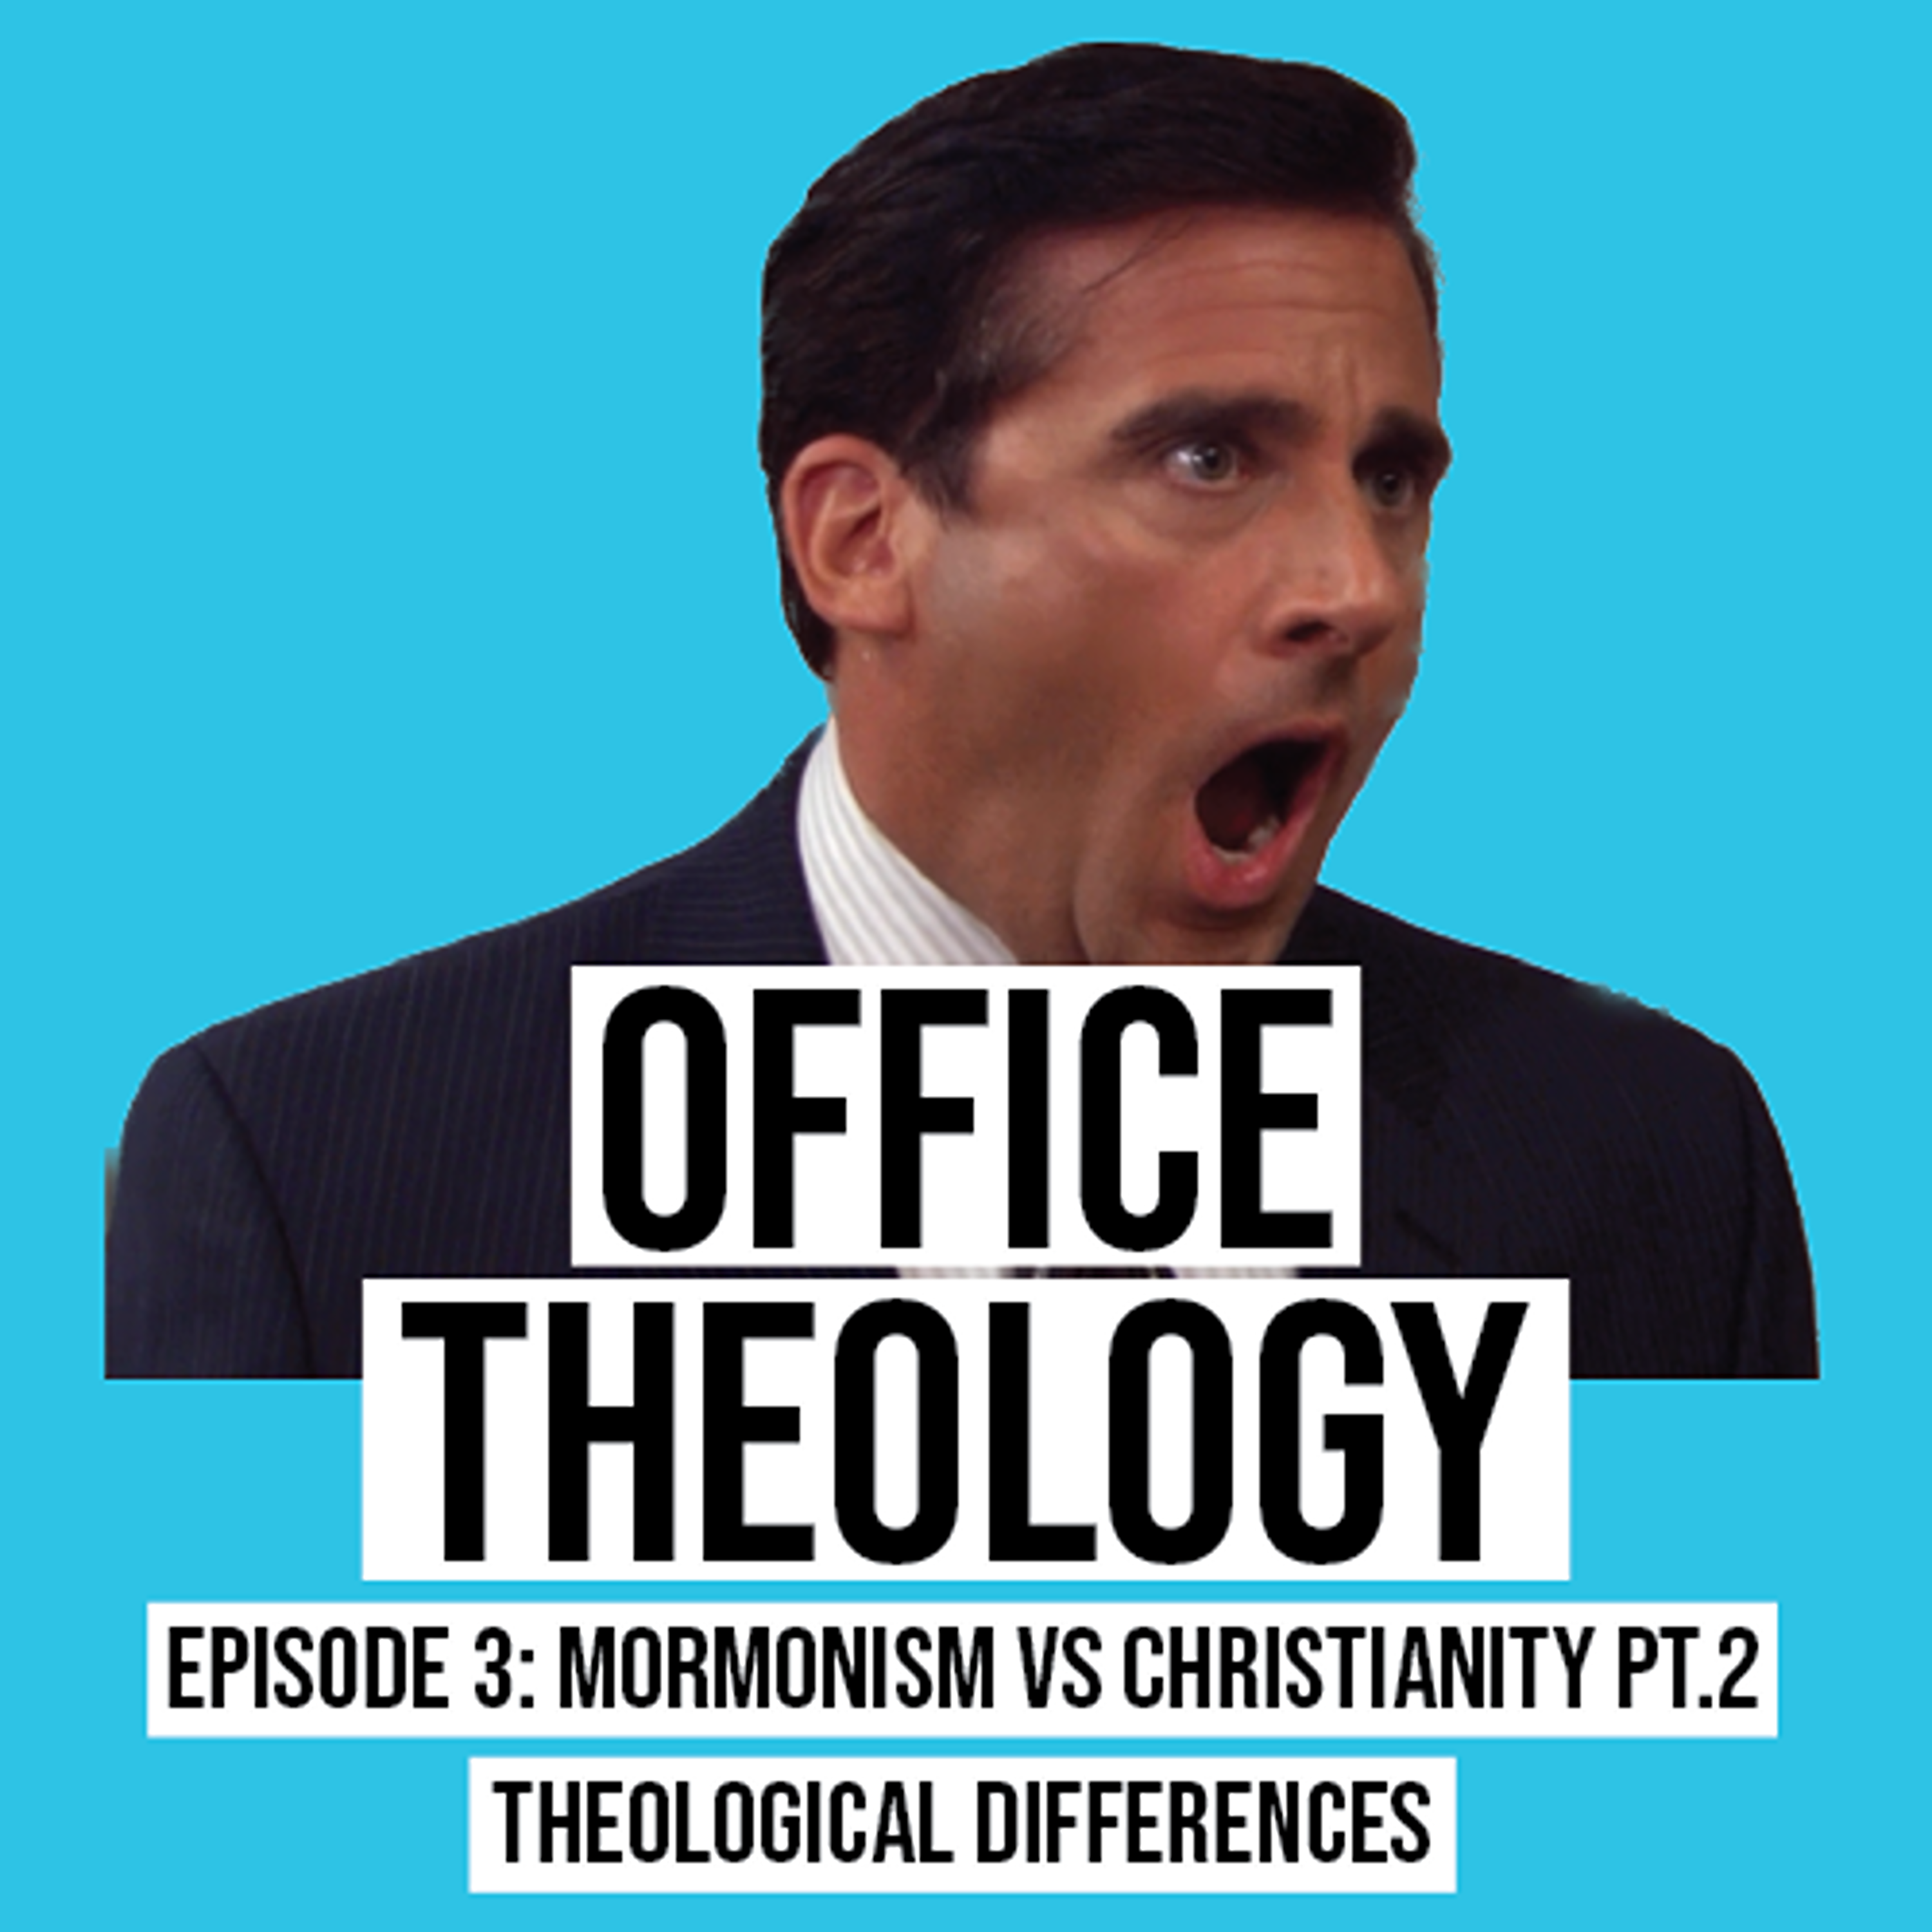 Episode 3: Pt. 2 of Mormonism vs. Christianity (Theological Differences)